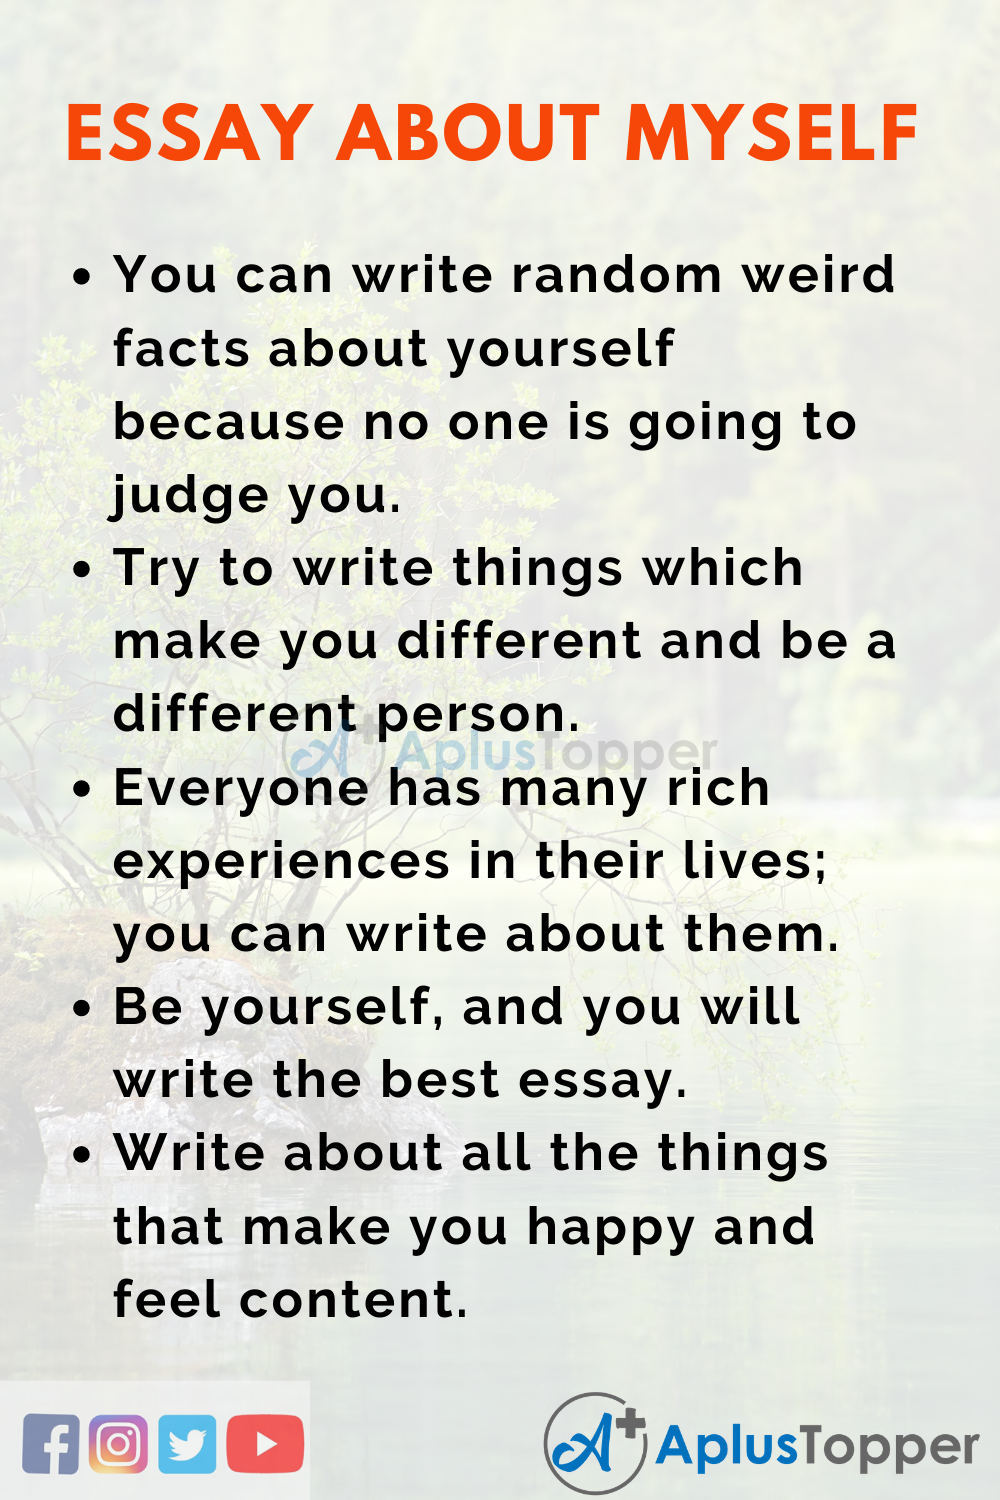 how to write an essay telling about yourself